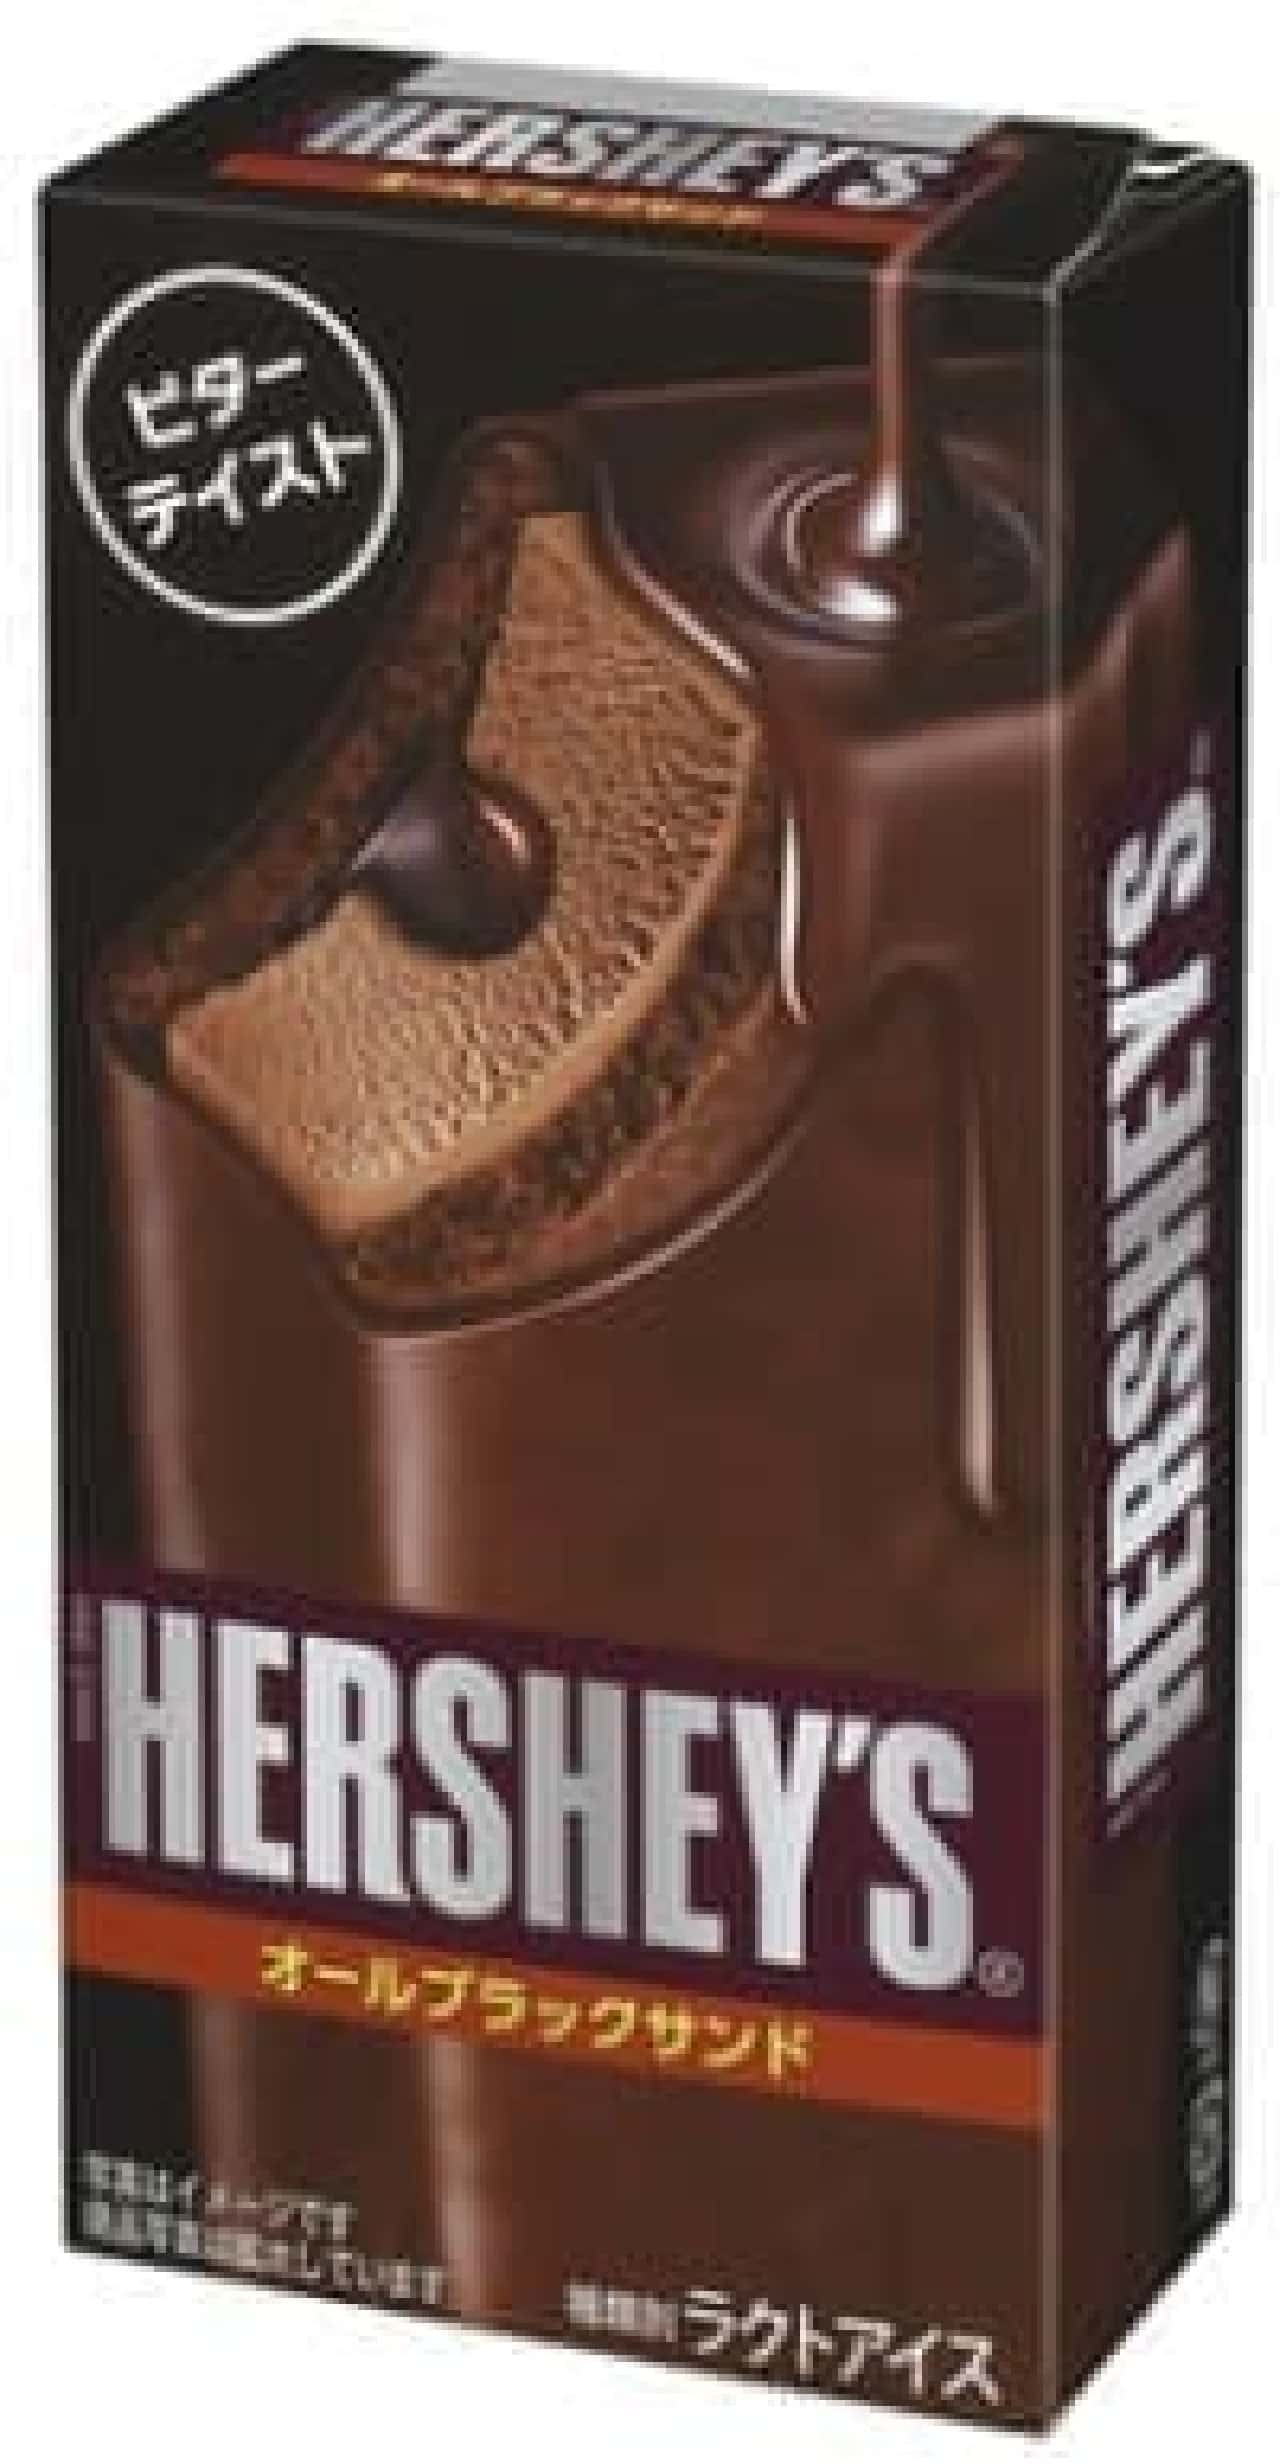 "HERSHEY'S" loved all over the world